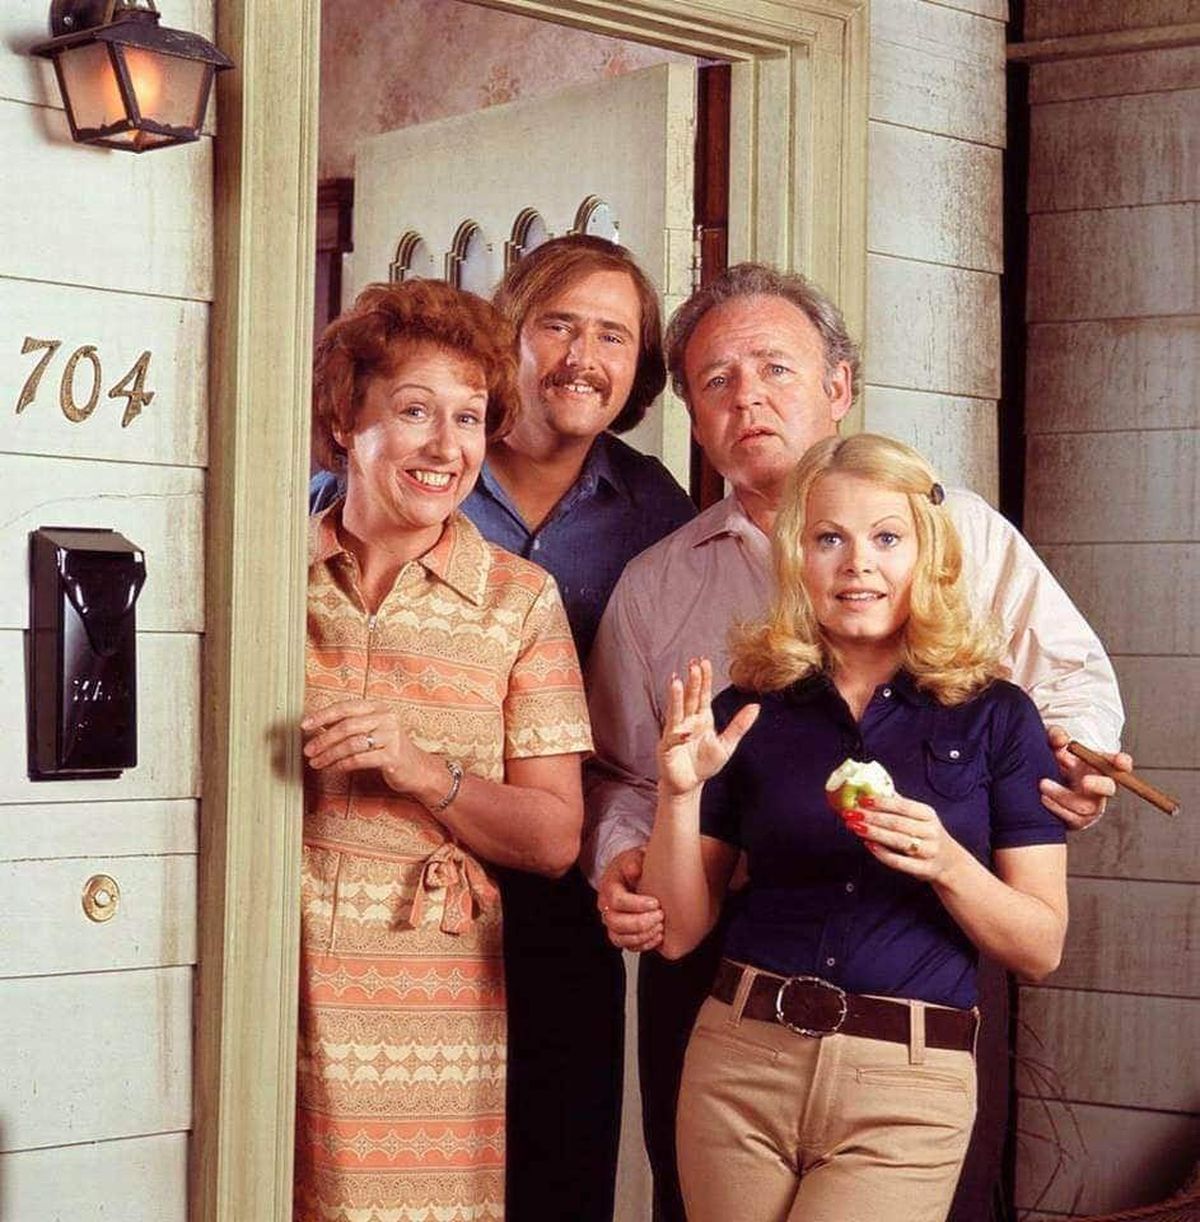 “All in the Family” (CBS)